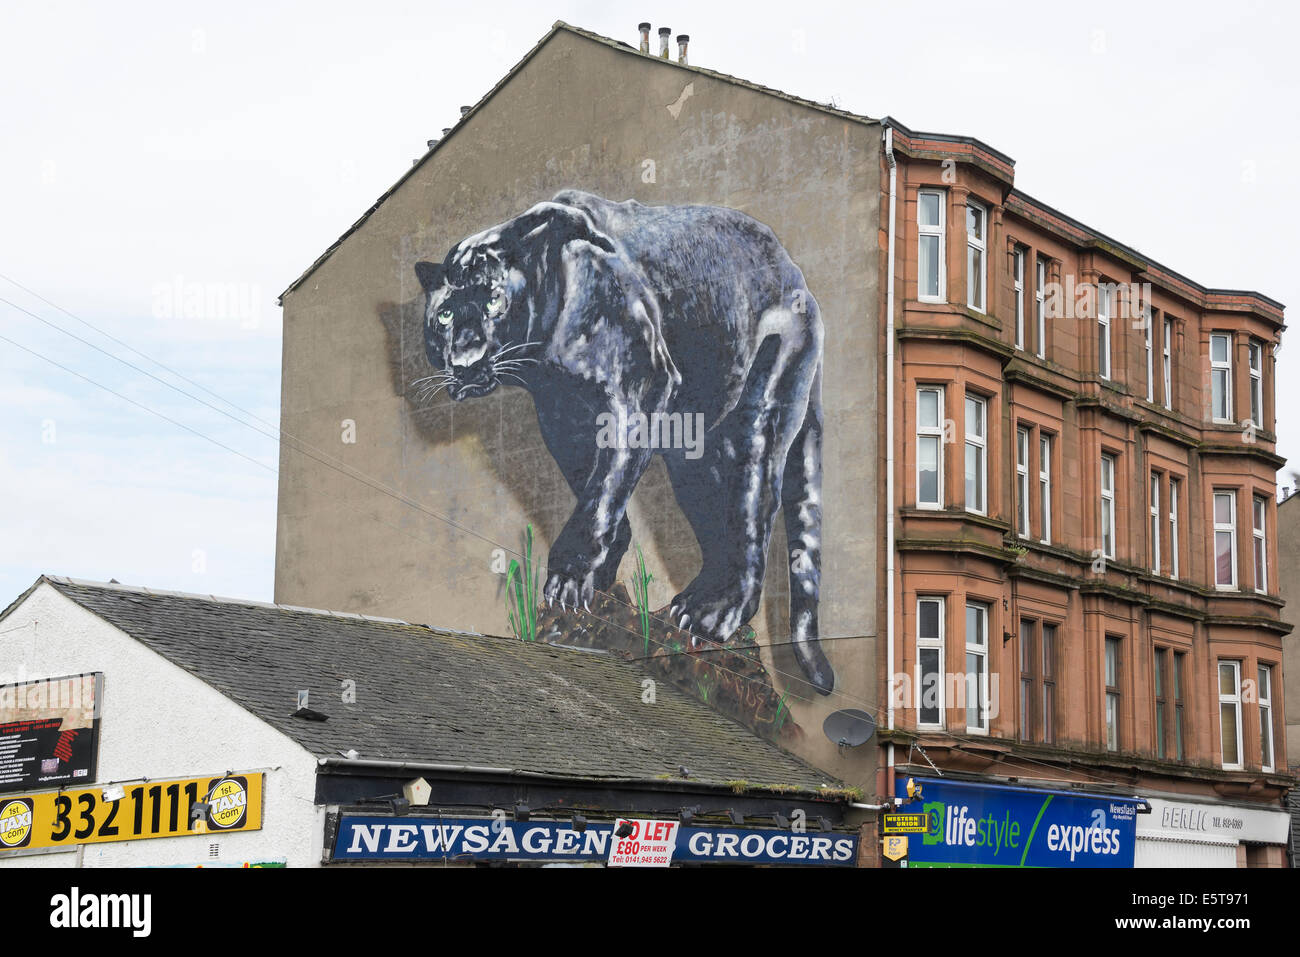 Black Panther Mural on gable end of tenement property in Maryhill Glasgow. Stock Photo